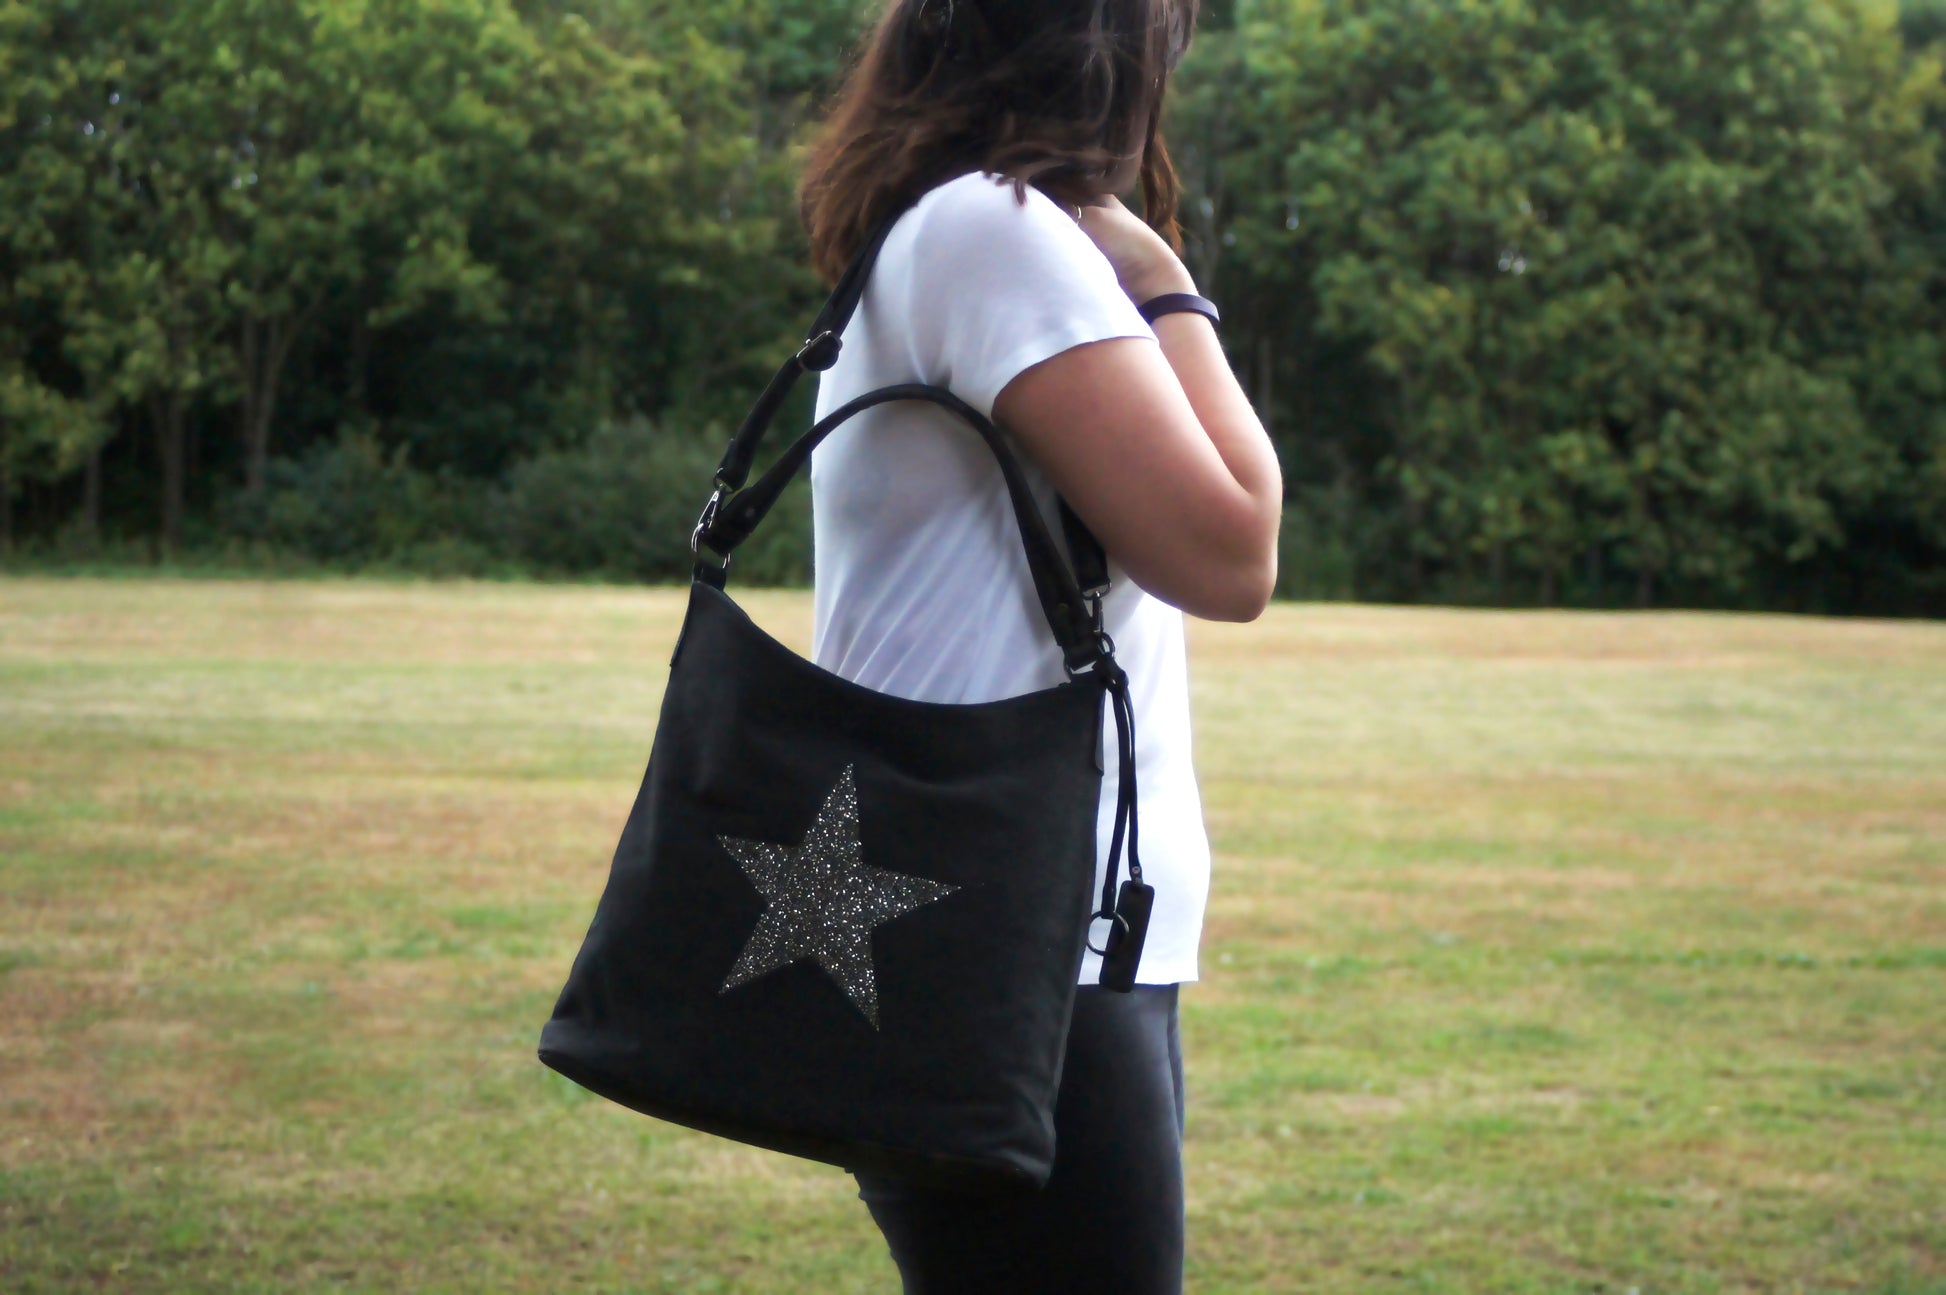 Swanky Swans Millie Handbag BlackPerfect for School, Weddings, Day out!